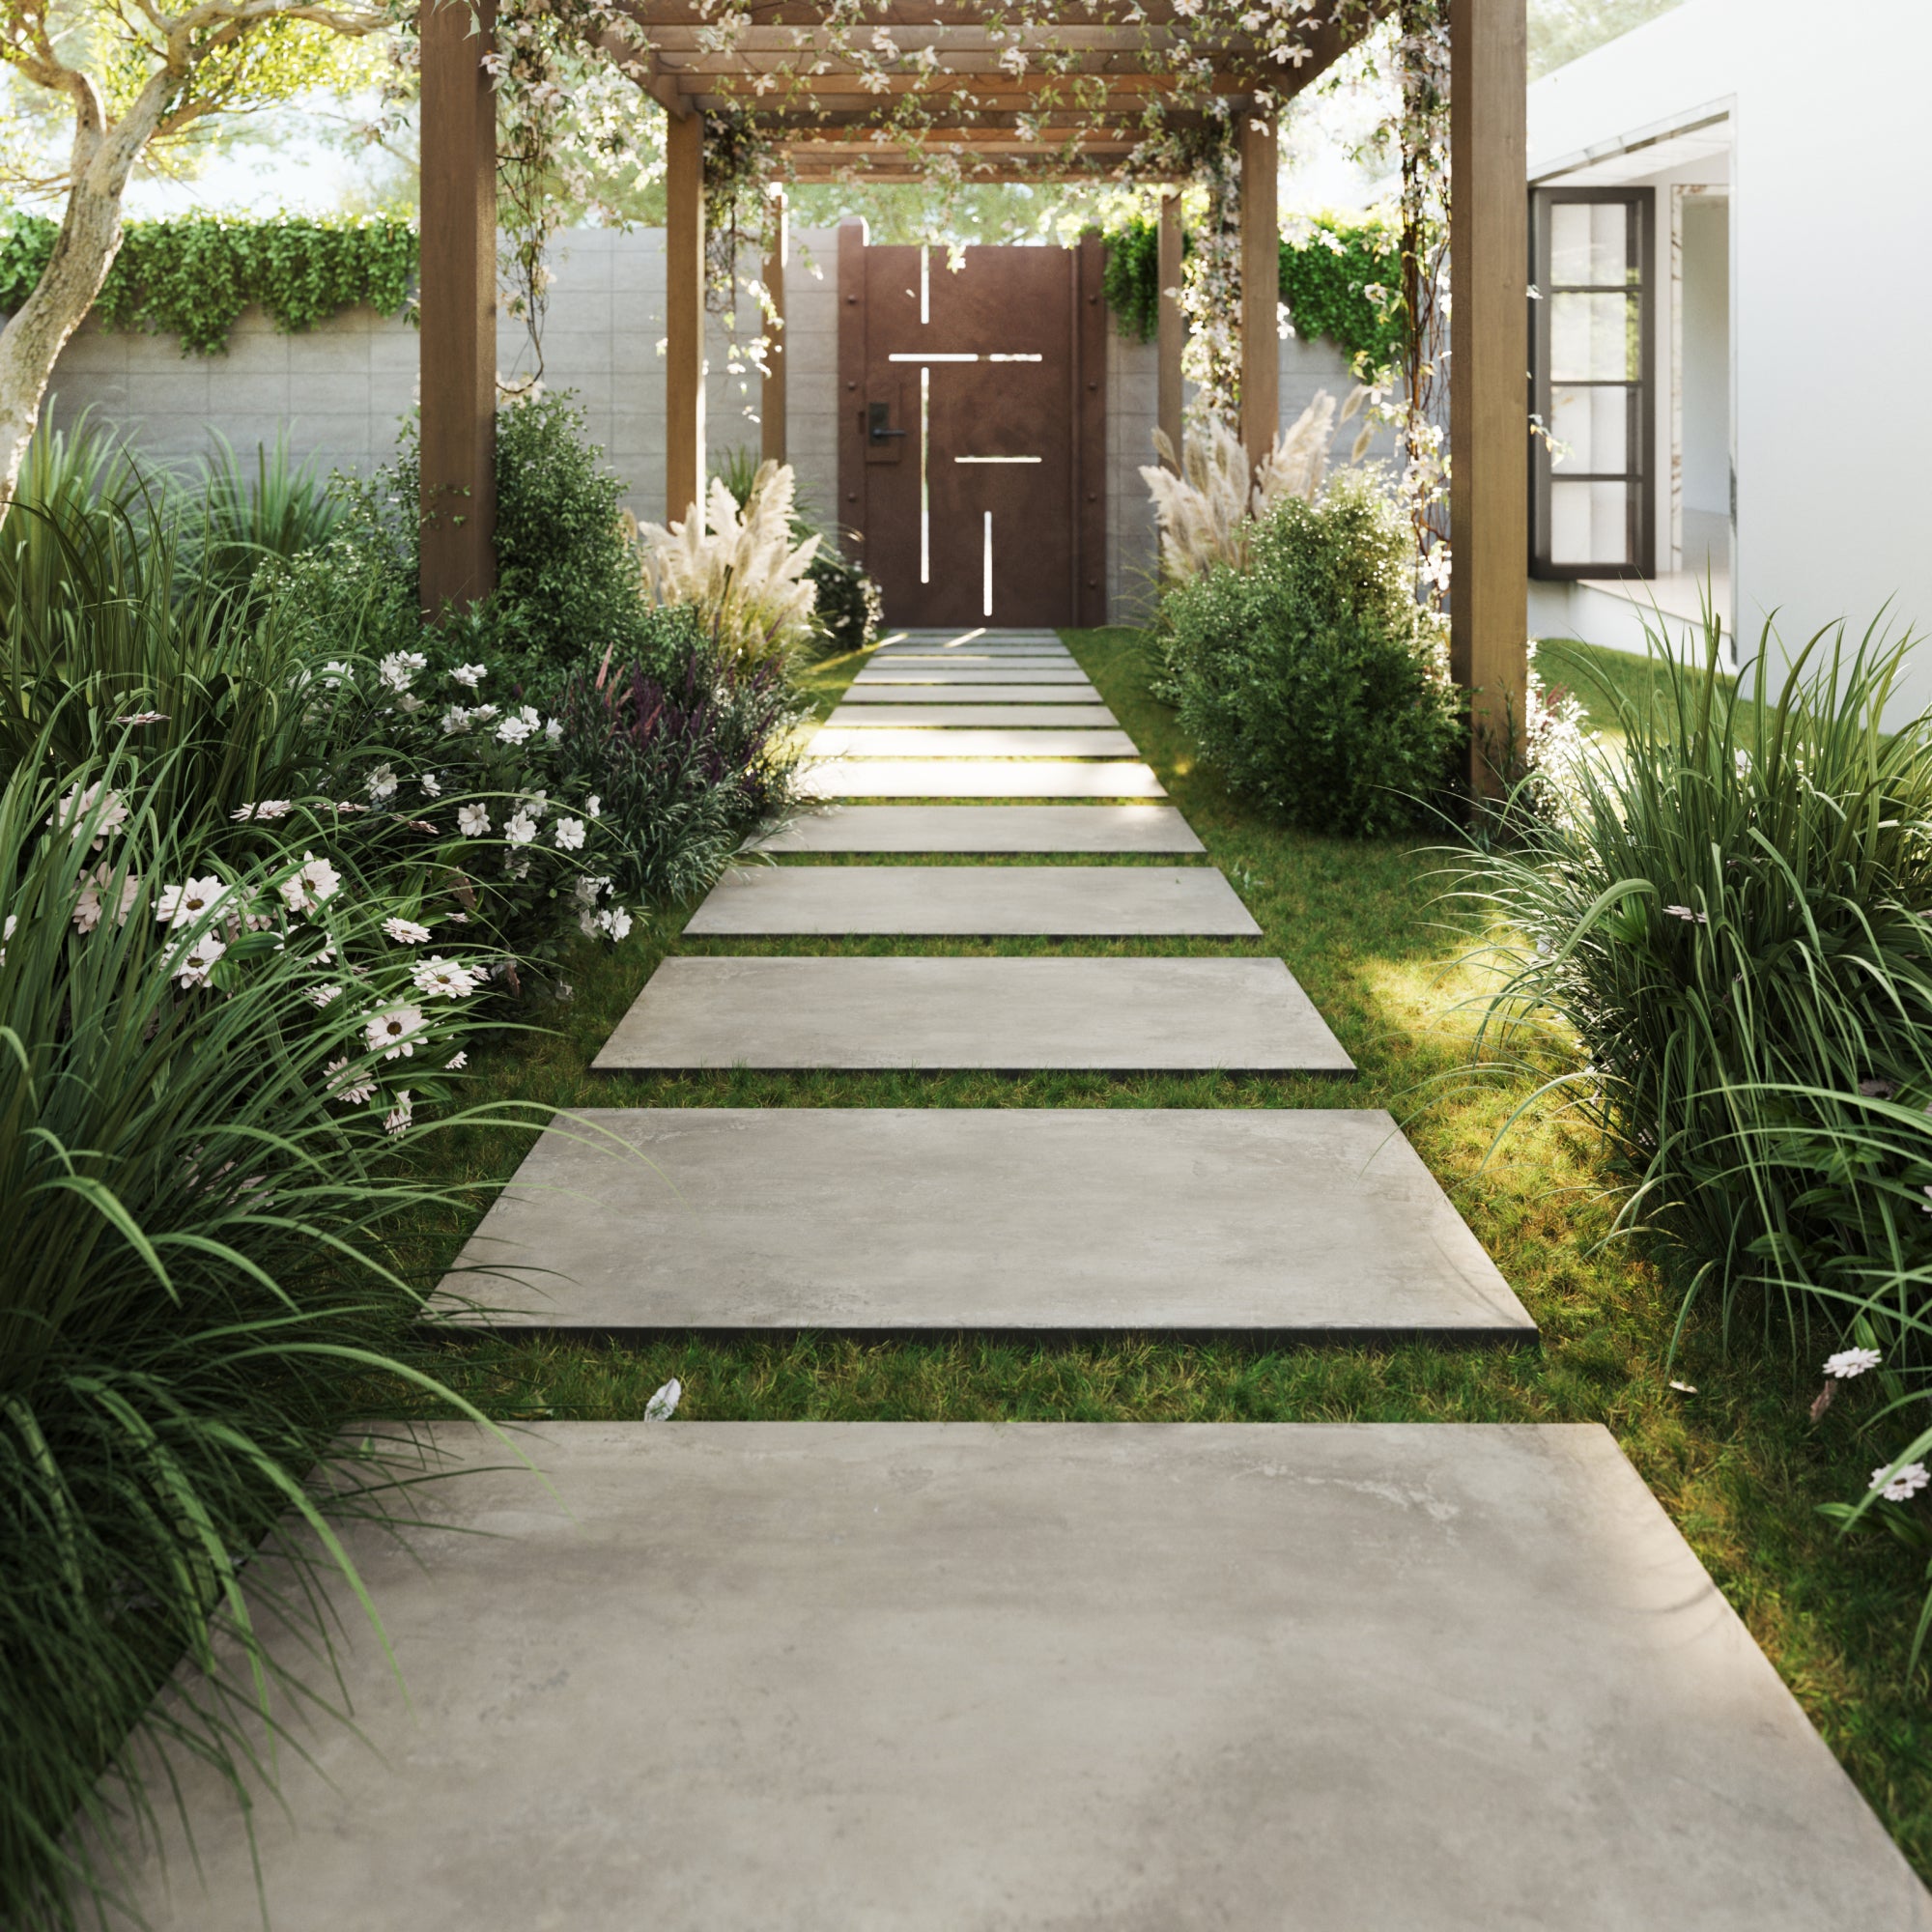 "Step into luxury with a walkway crafted from Ramsey 24x48 Grip Porcelain Outdoor Field Tiles in Putty. These 2CM concrete-look porcelain pavers offer an elegant and sturdy pathway, blending the industrial chic aesthetic with outdoor grandeur. Each tile is a testament to sophisticated design, providing a durable and safe surface that stands the test of time while gracing any exterior space with an air of opulence.